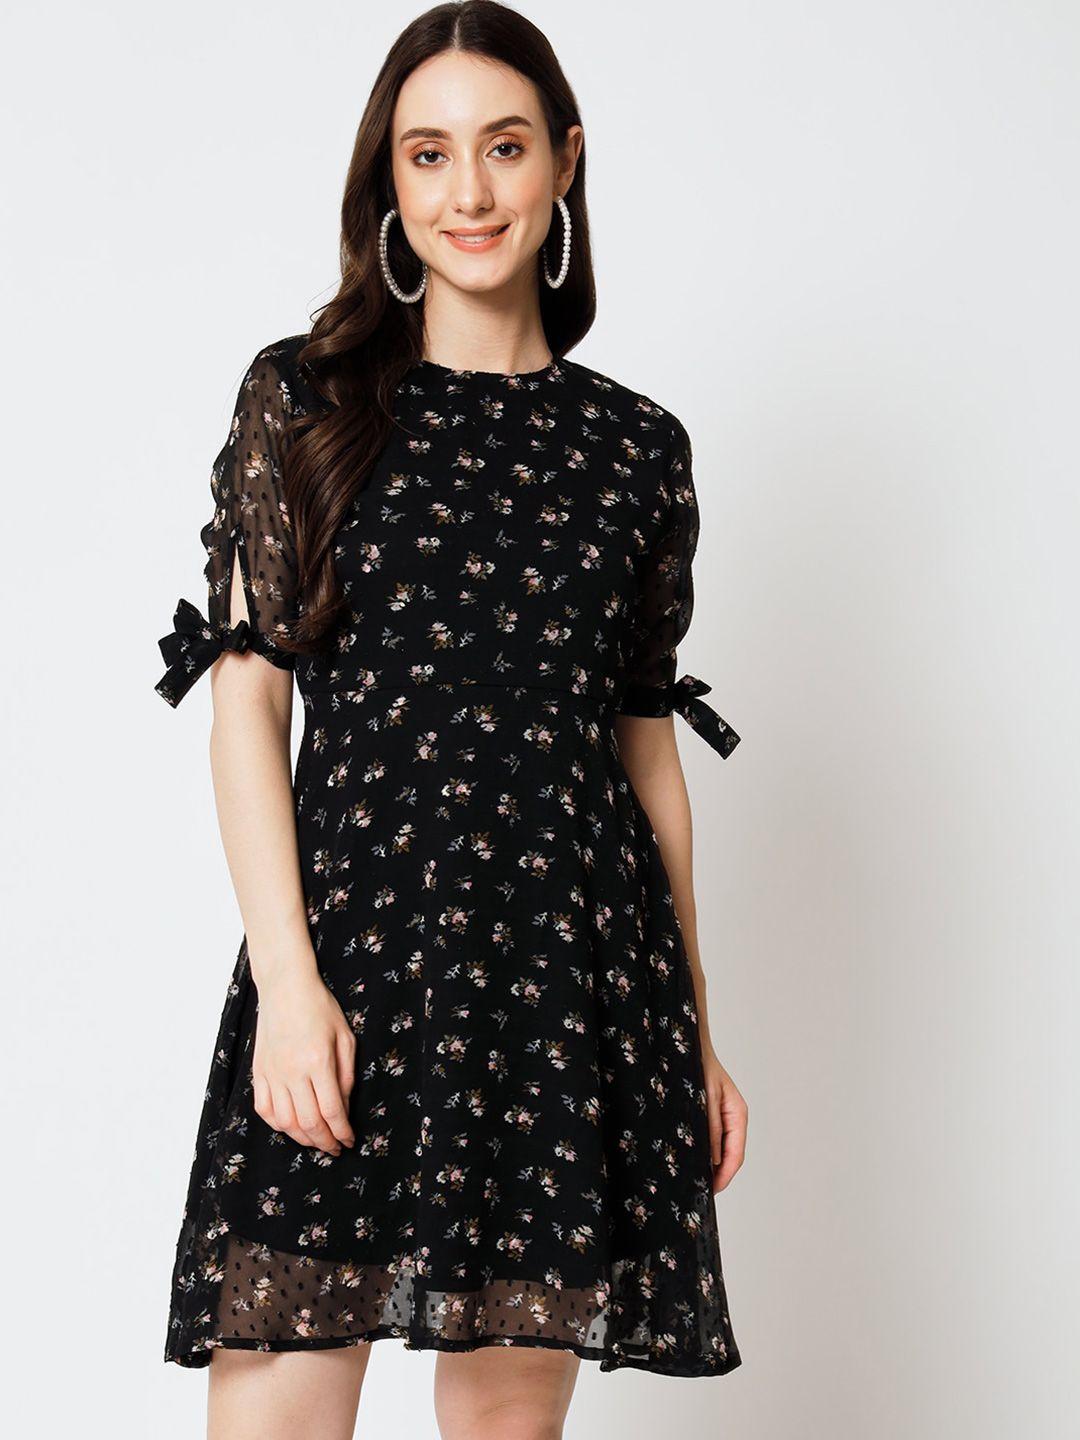 yaadleen floral printed round neck fit & flare dress